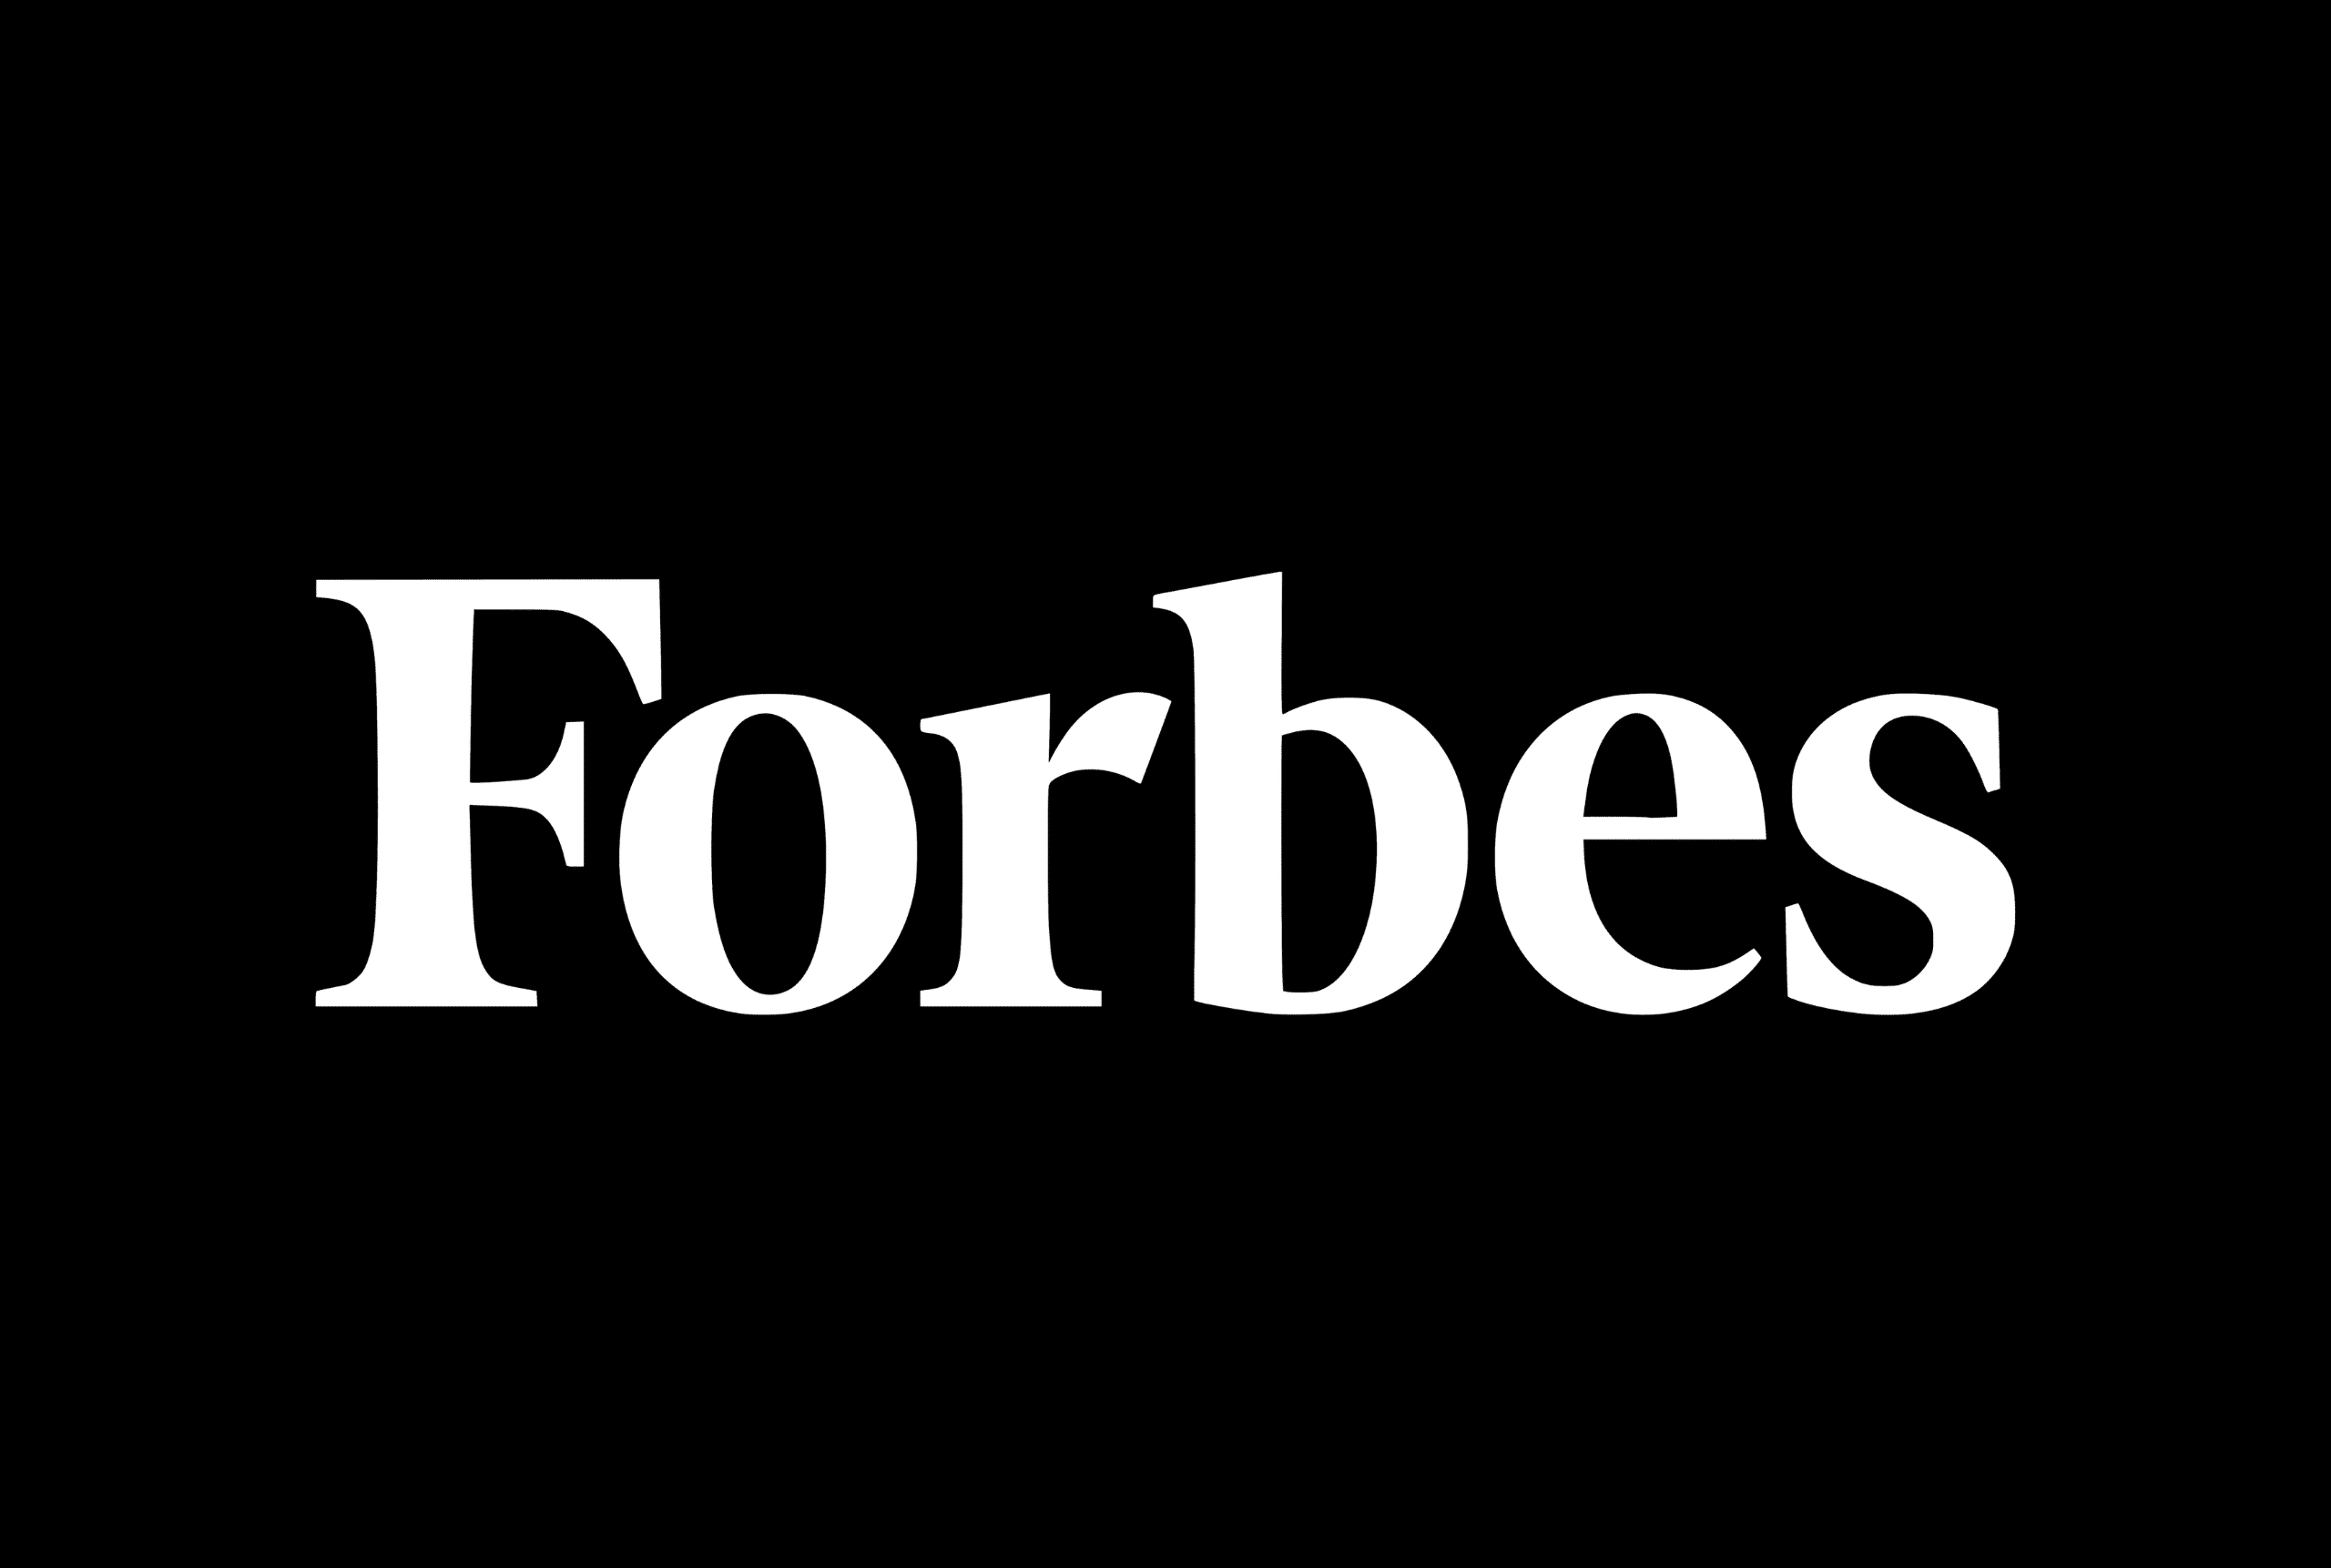 EcoSmart Stud featured in Forbes magazine